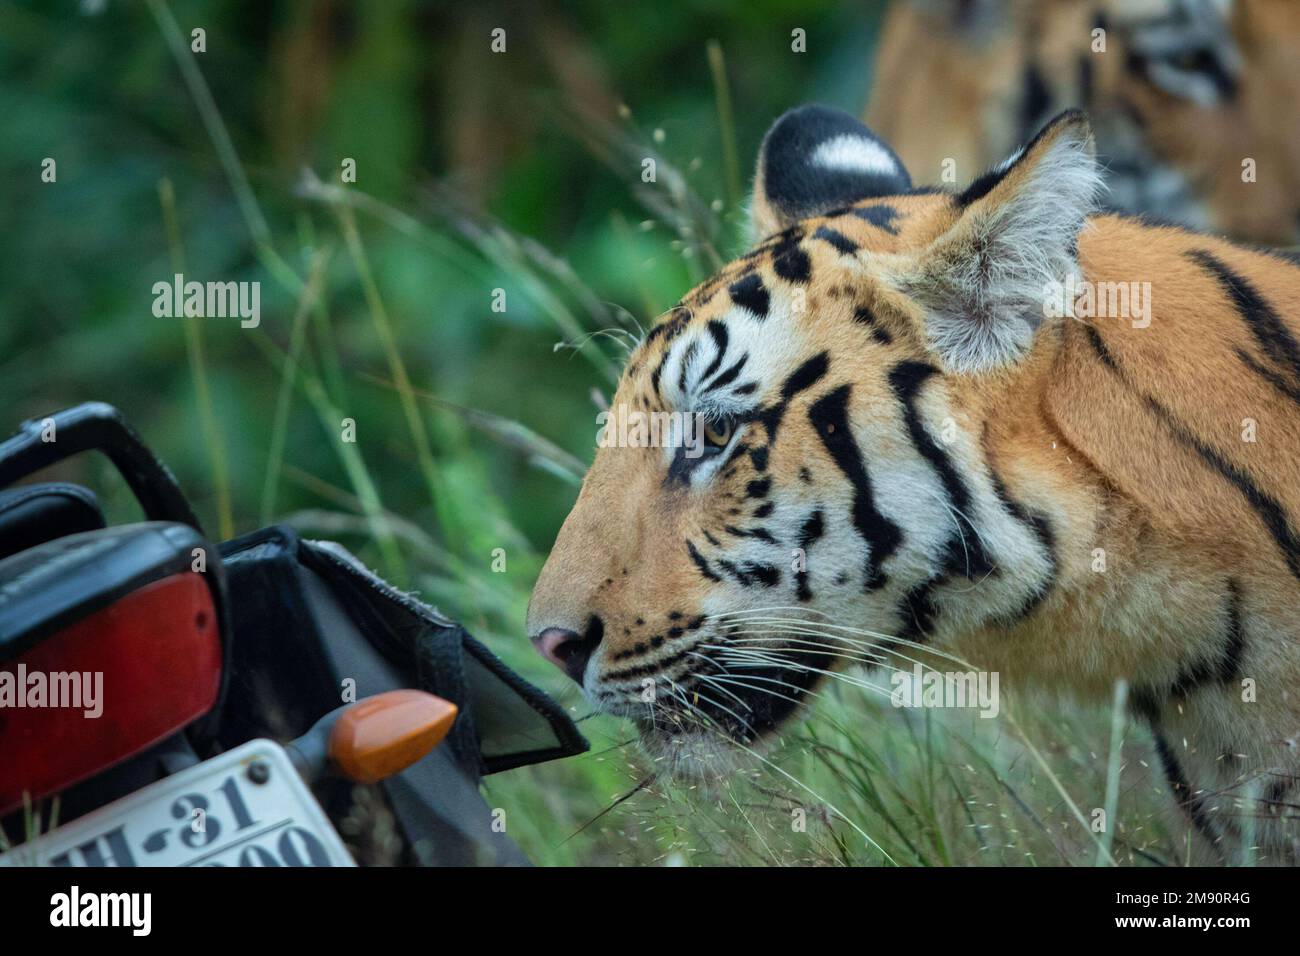 A curious tiger. India: THESE INCREDIBLE images show how curious tigers can delay bikers from getting home while examining their motorbikes. One image Stock Photo